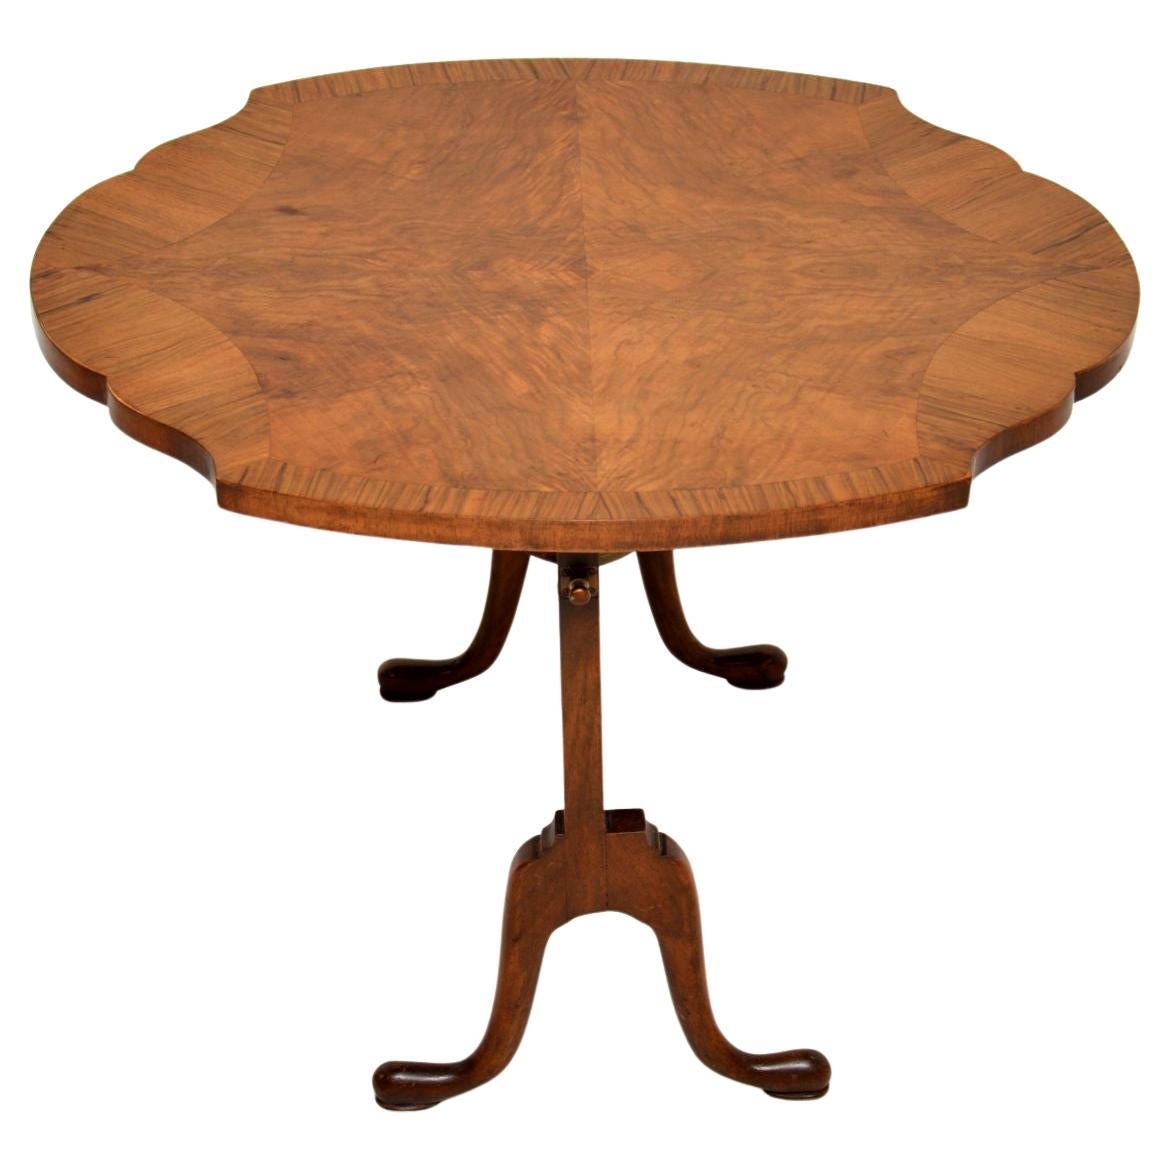 A wonderful antique walnut side table, this was made in England, it dates from around the 1900-1920 period.

The top tilts to be used vertically as a fire screen or horizontally as an occasional side / coffee table.

The quality is excellent,